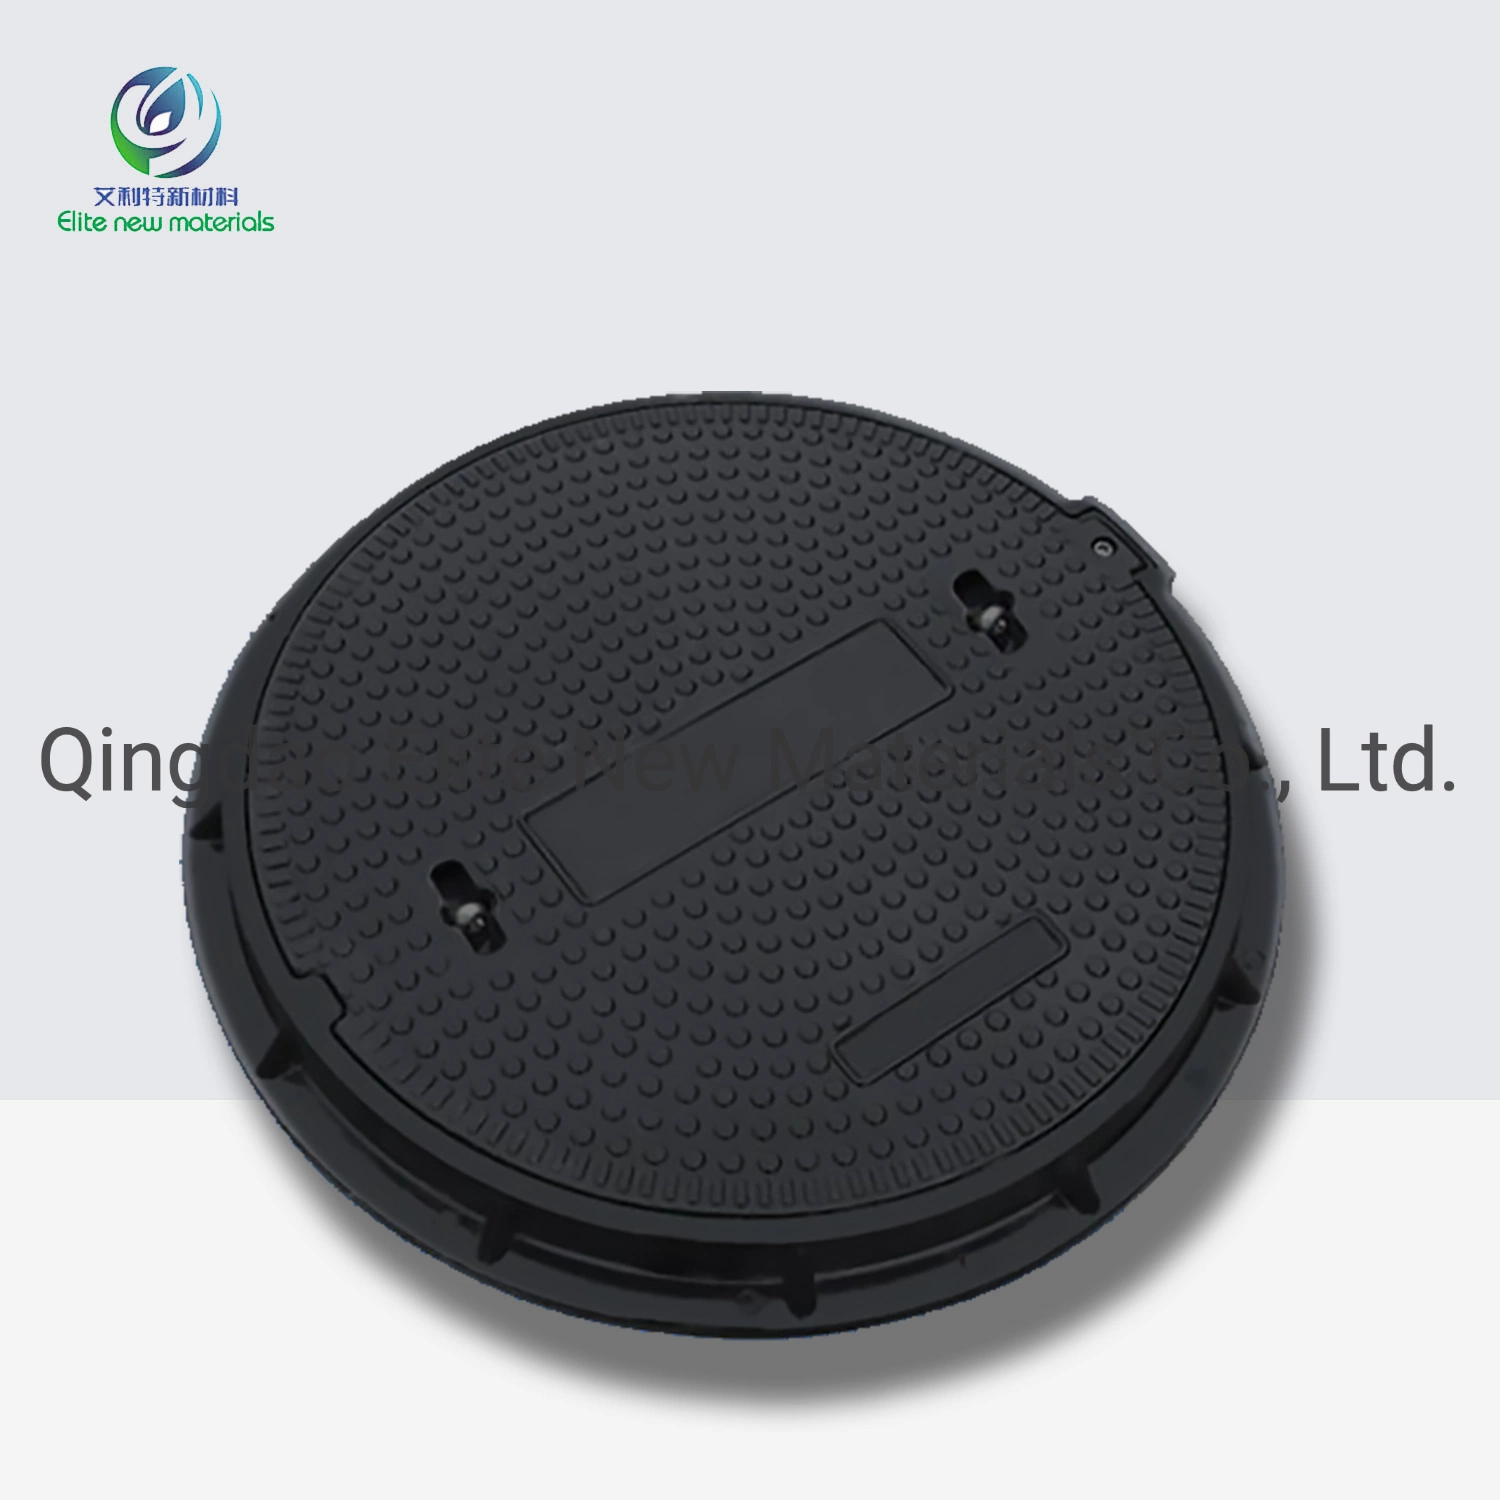 for Telecommunications Well BMC Manhole Cover Opm